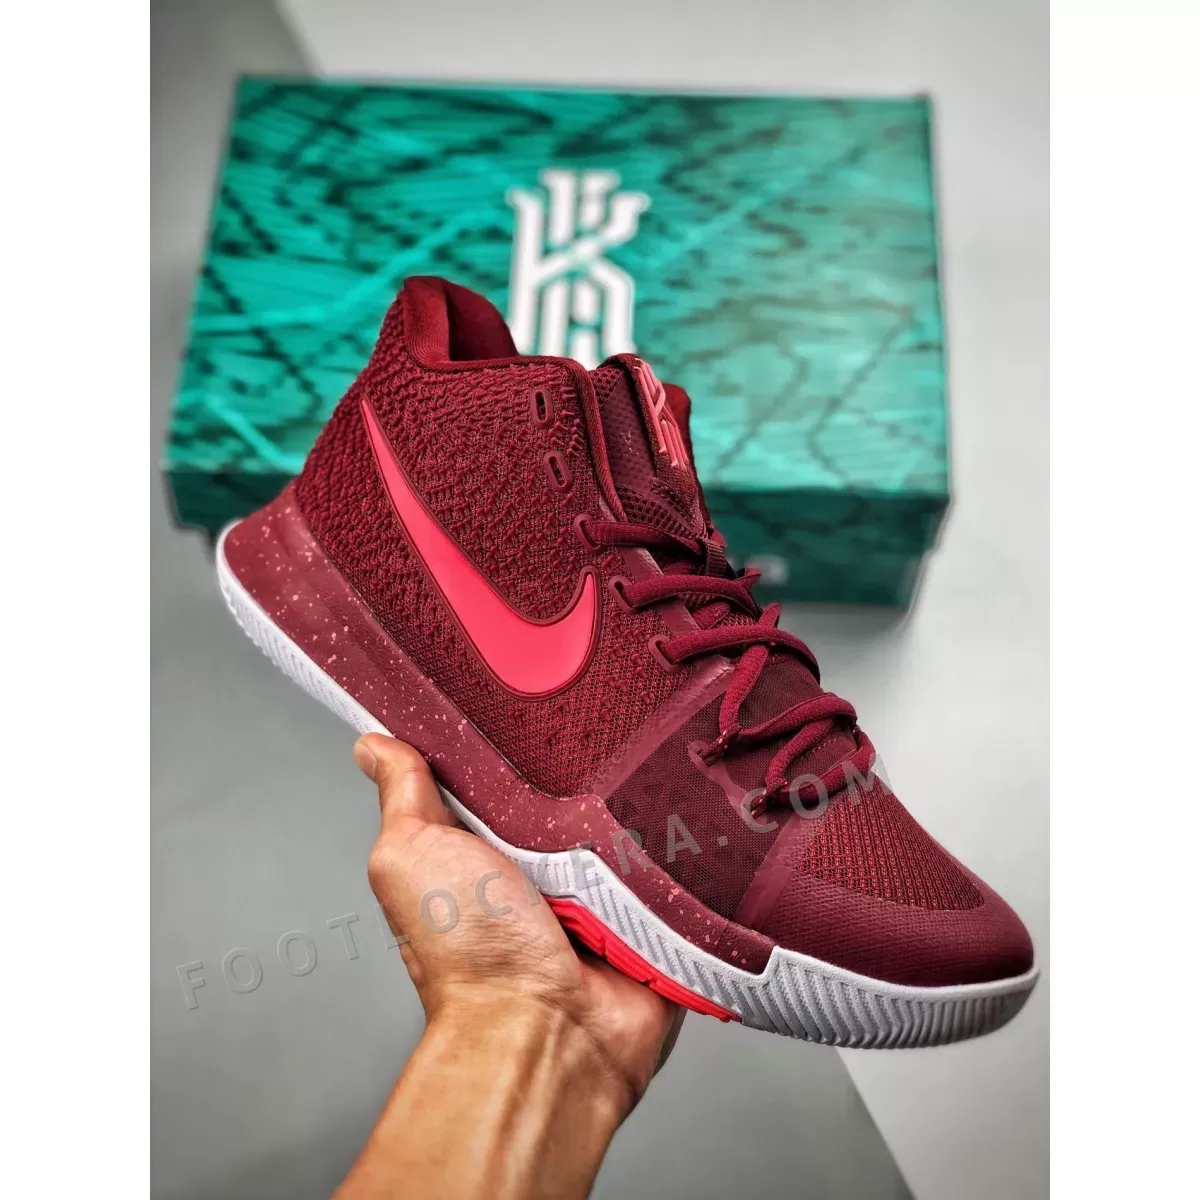 Nike Kyrie 3 'Warning' Team Red/Hot Punch-White / red hot punch